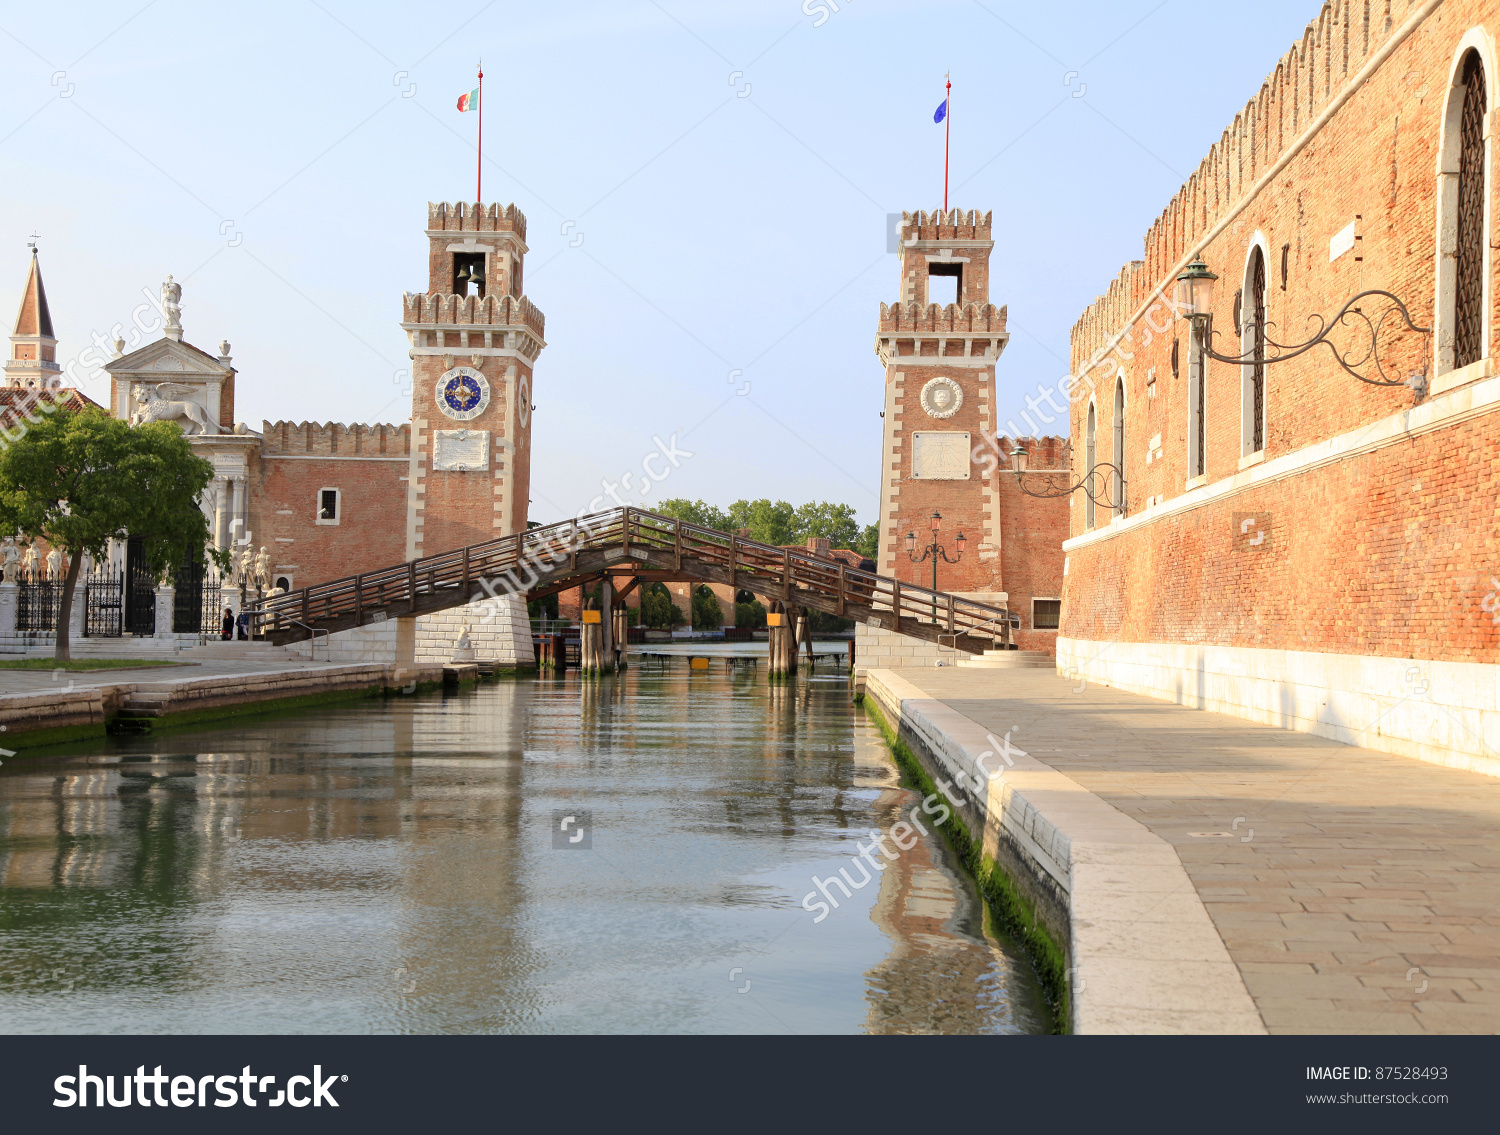 Arsenal Towers In Venice, Italy Stock Photo 87528493 : Shutterstock.